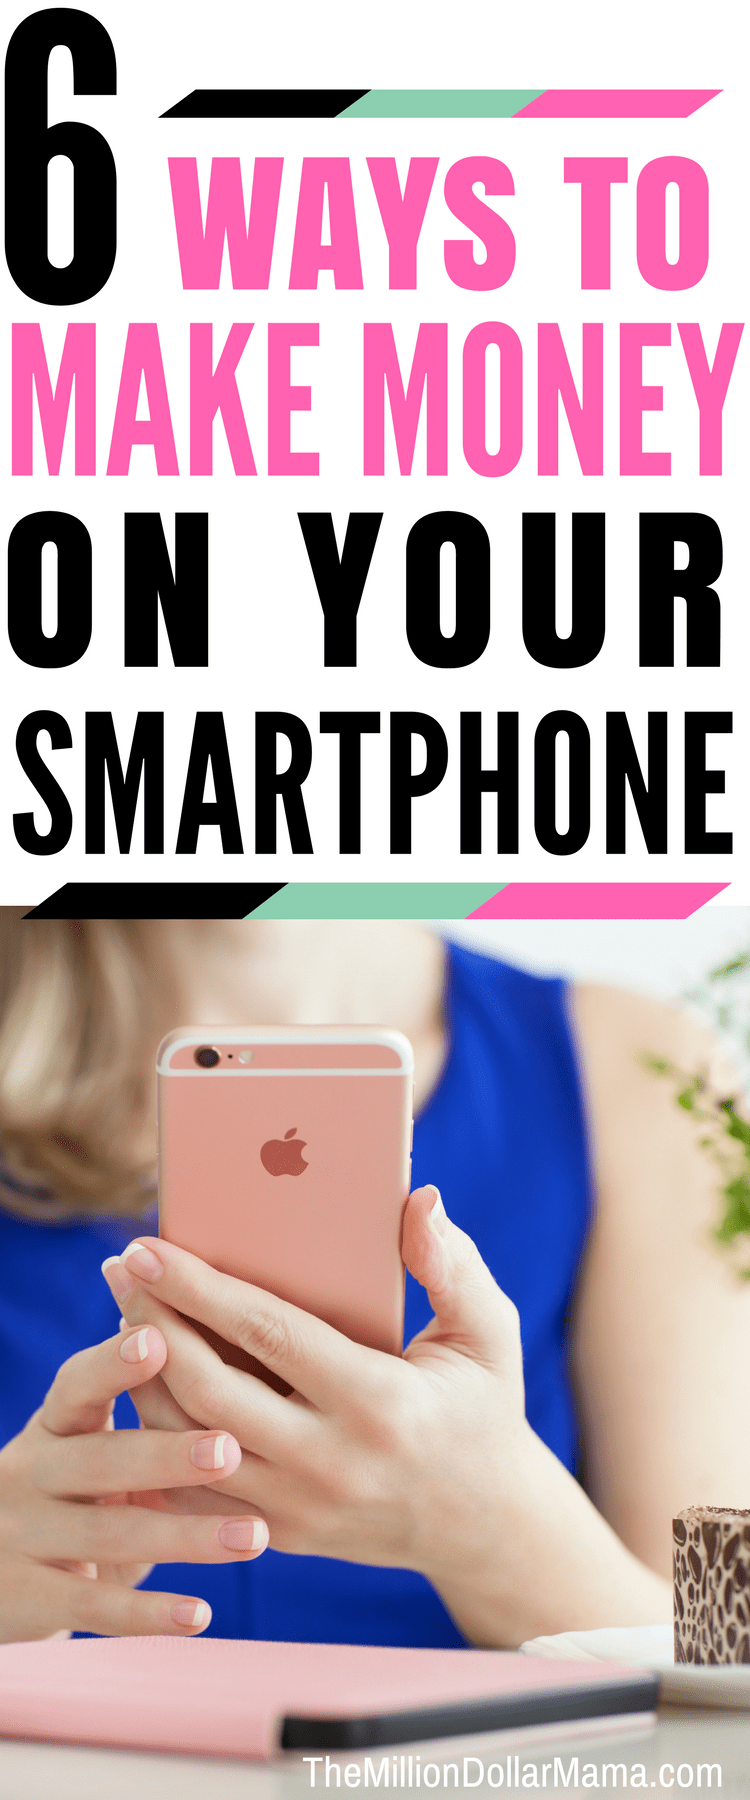 How to make money on your phone - 6 ways to make extra cash from your smartphone